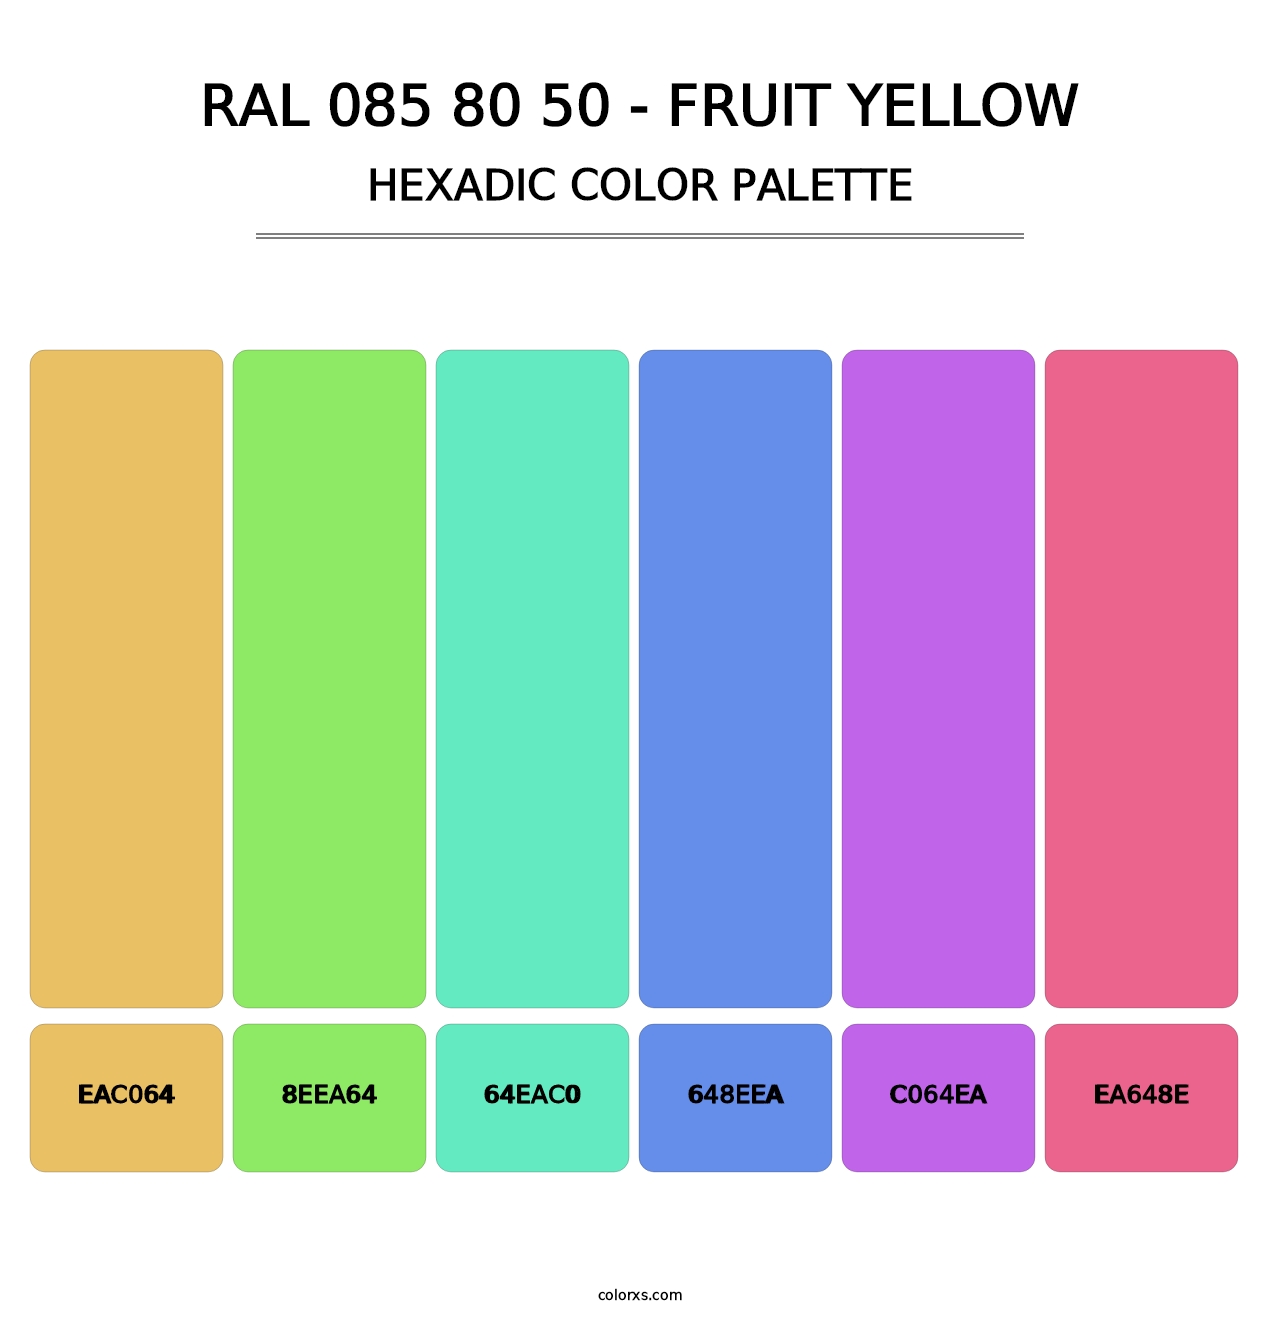 RAL 085 80 50 - Fruit Yellow - Hexadic Color Palette